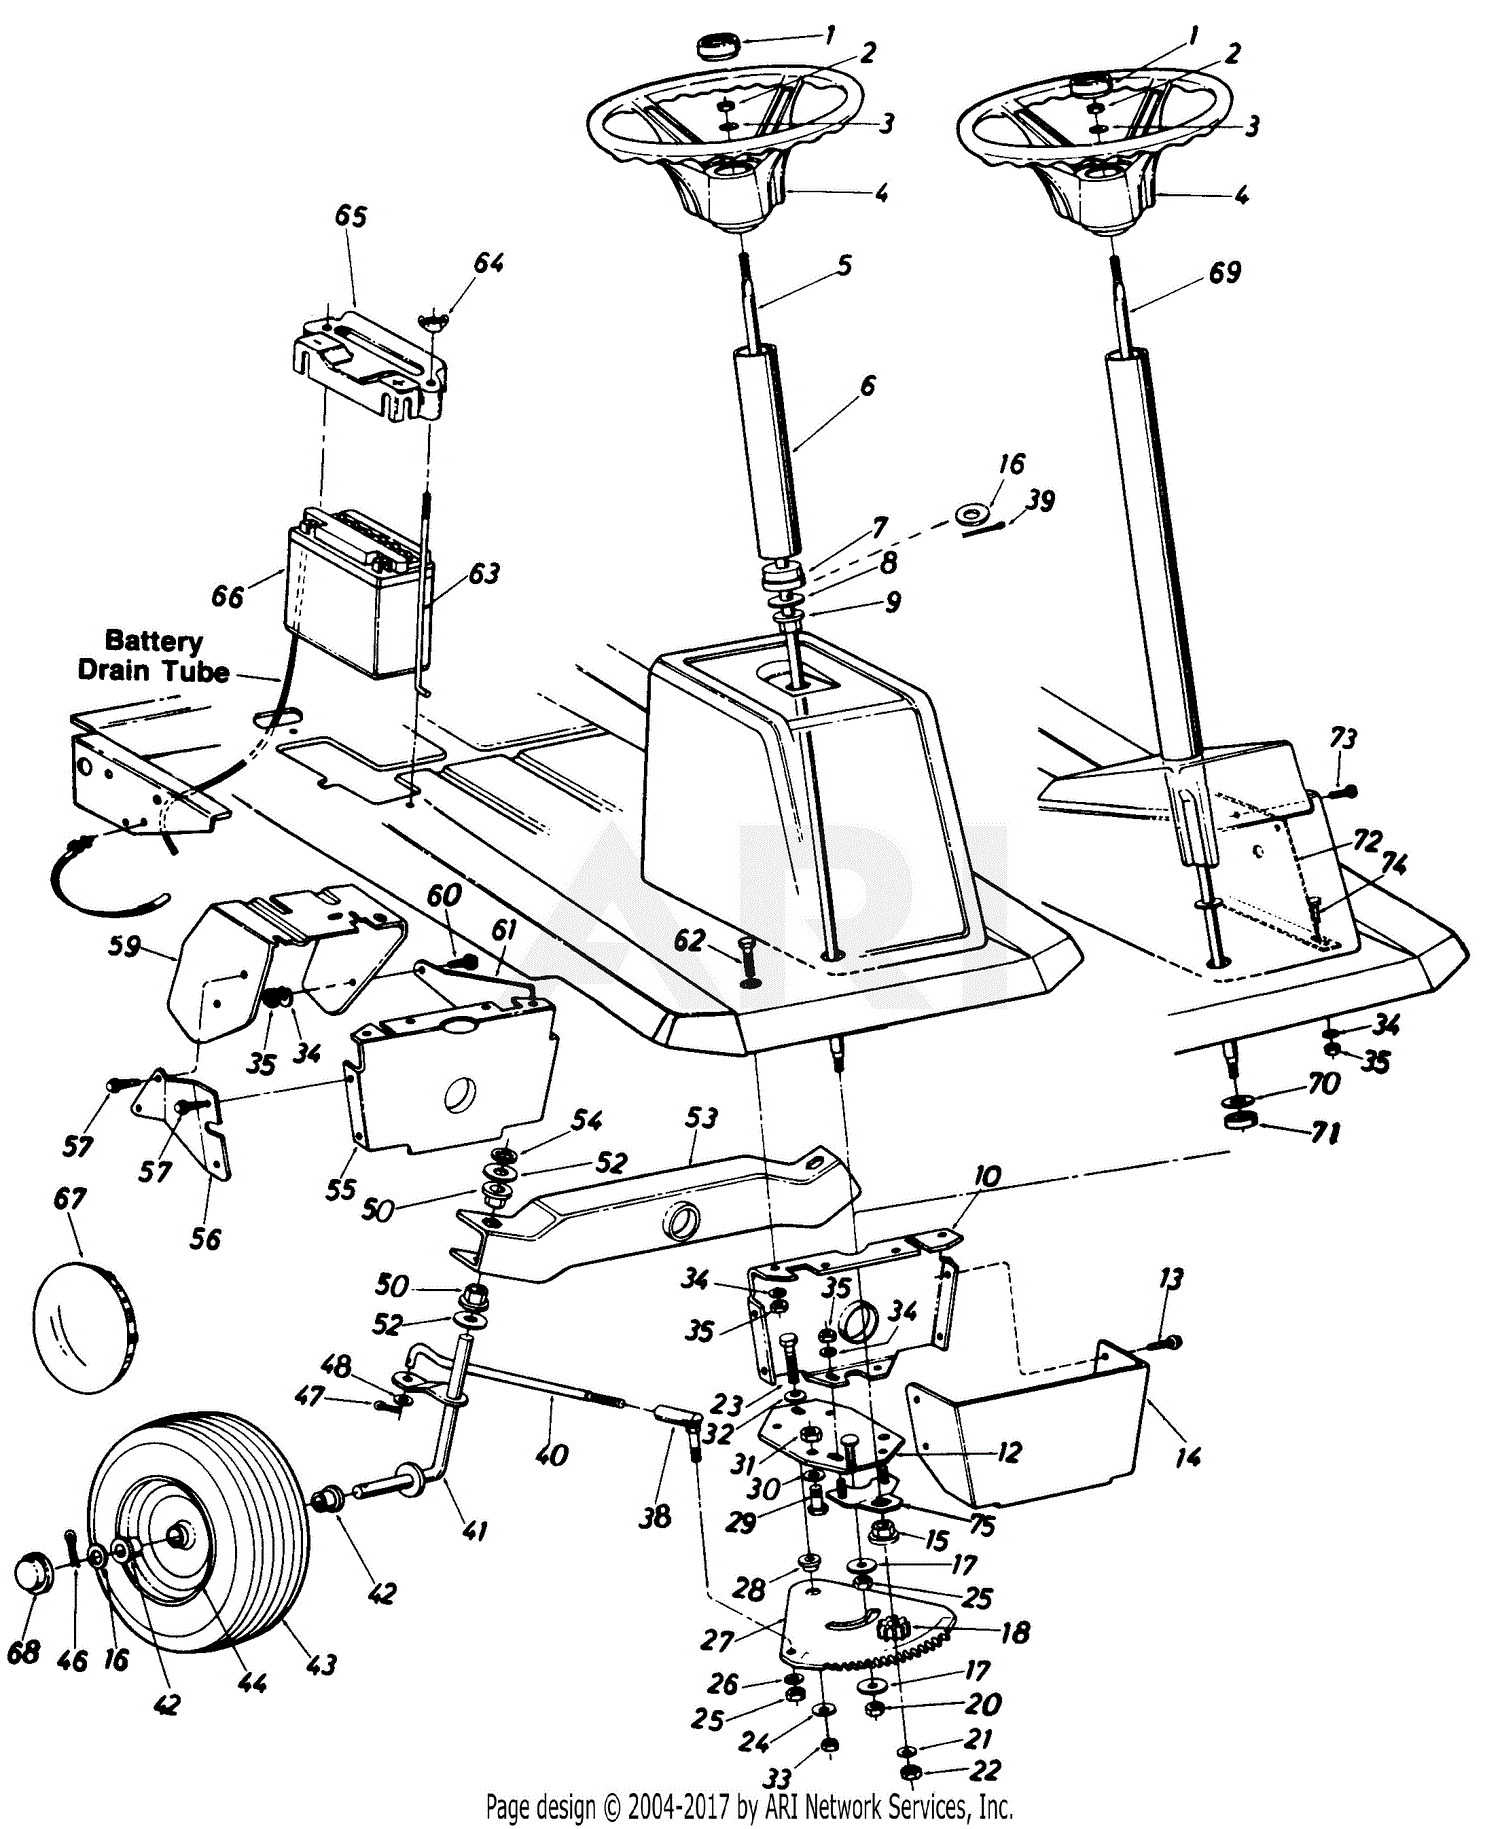 Mtd Lawn Tractor Parts Diagram Mtd 770 Front Engine Lawn Tractor